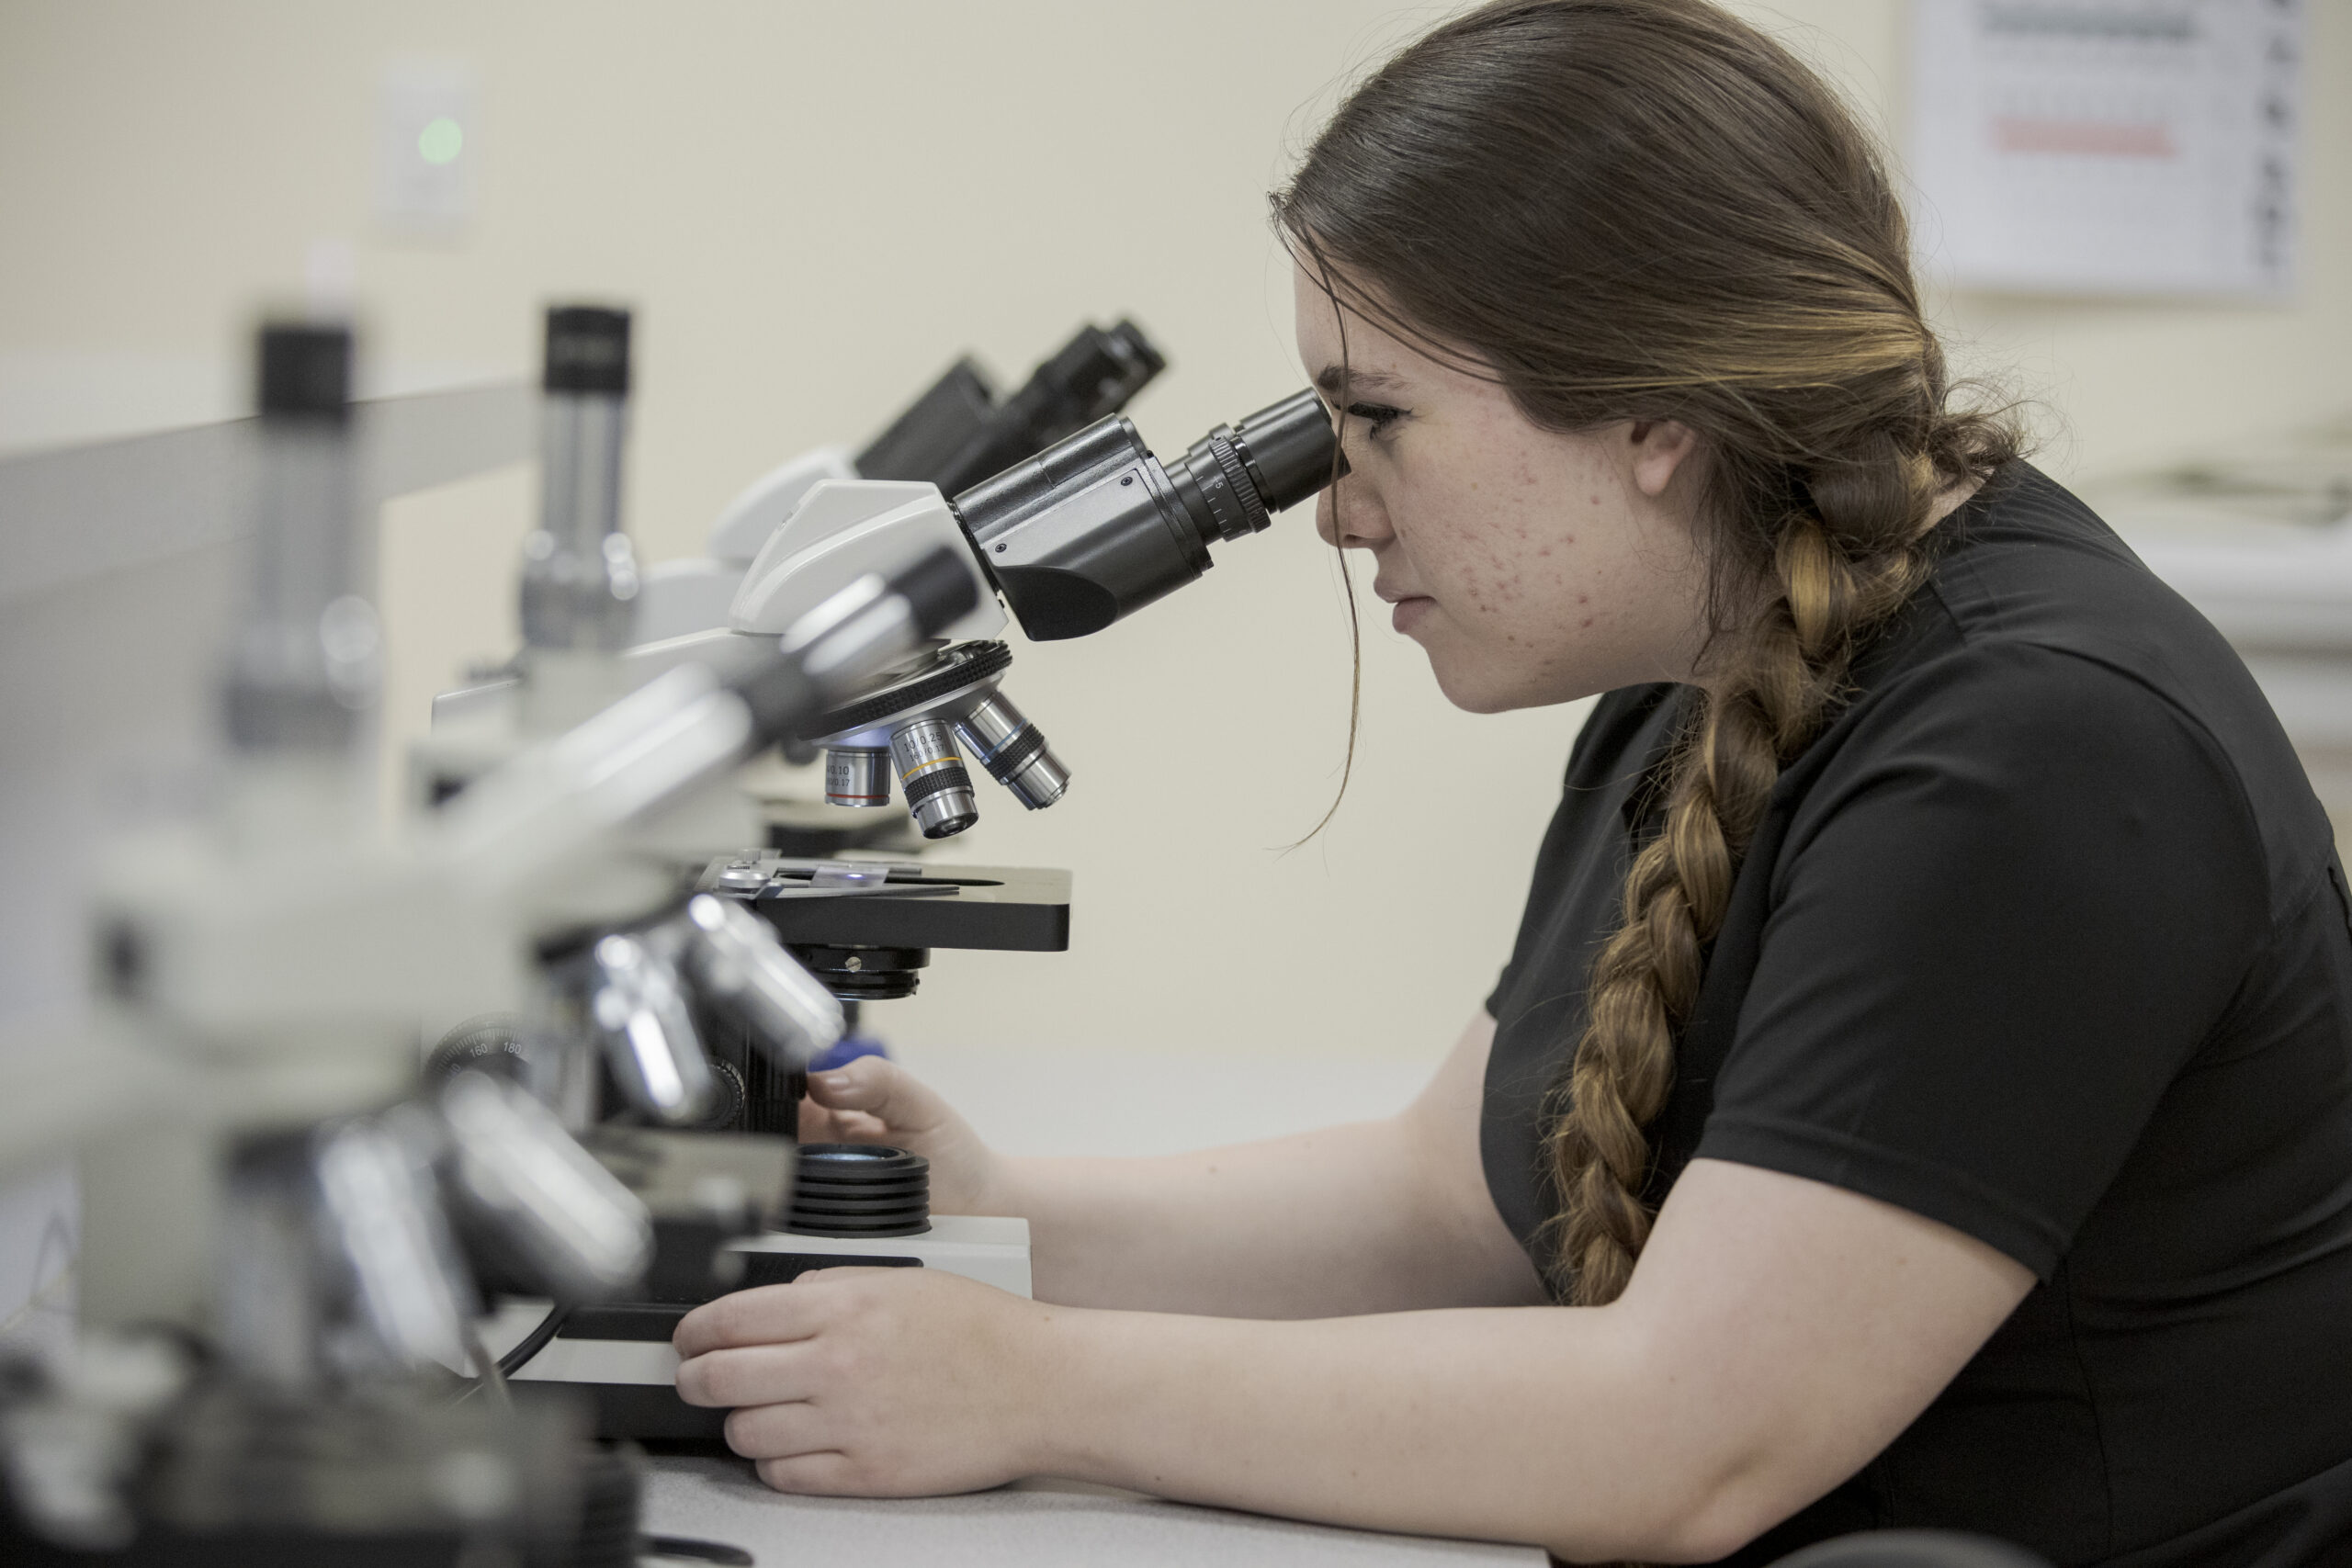 Nurse Assisting student looking into microscope in Denver, CO